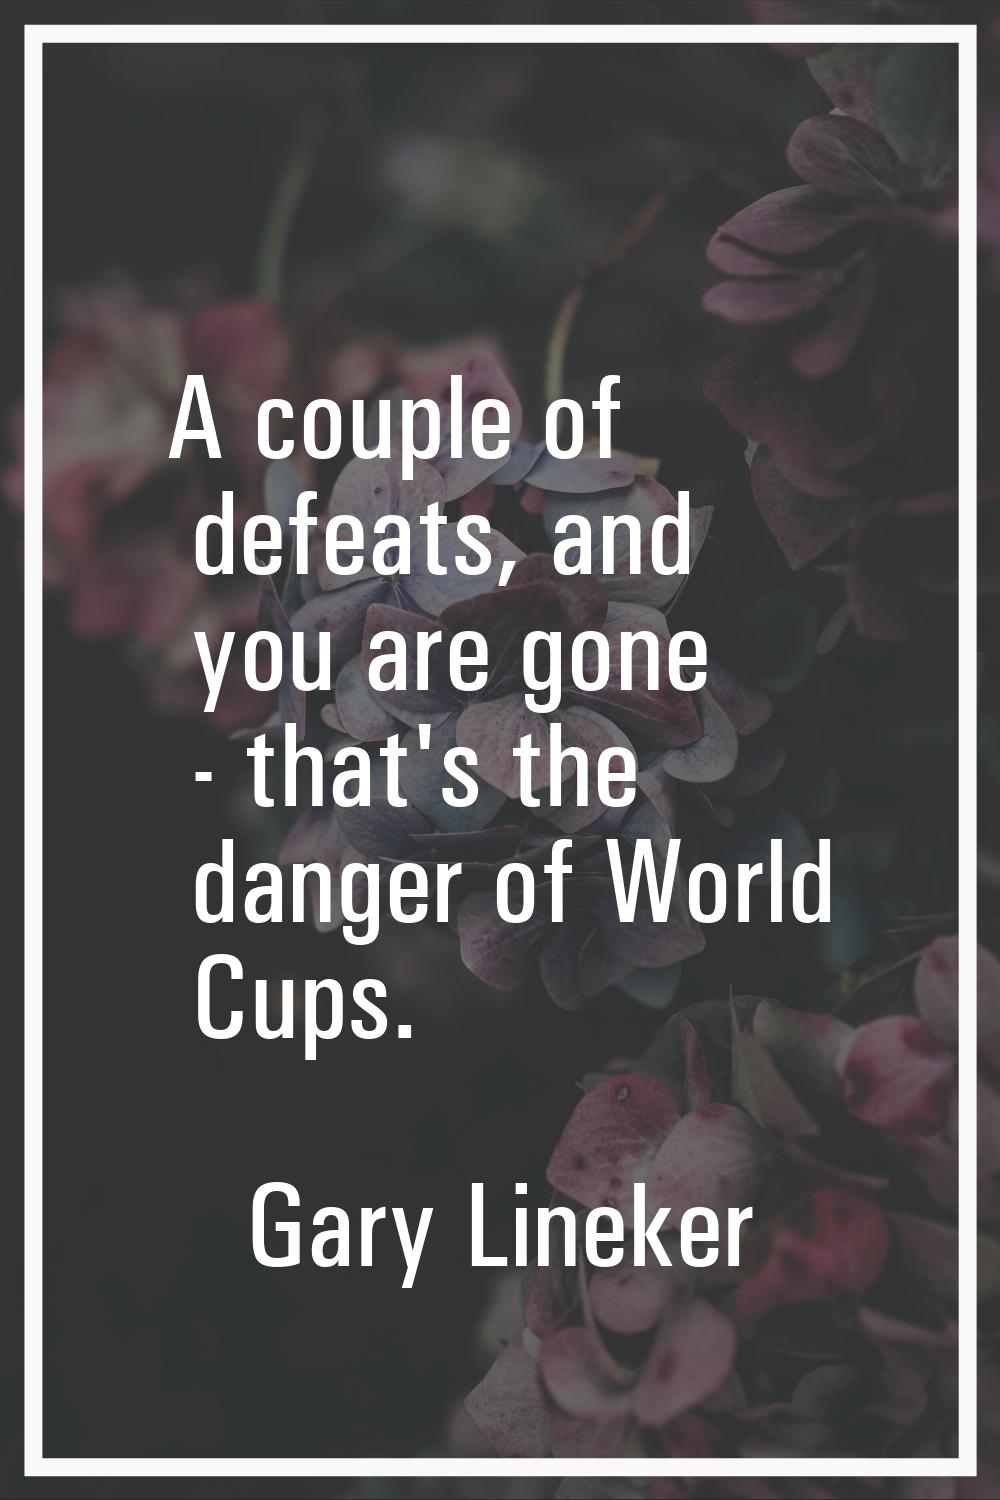 A couple of defeats, and you are gone - that's the danger of World Cups.